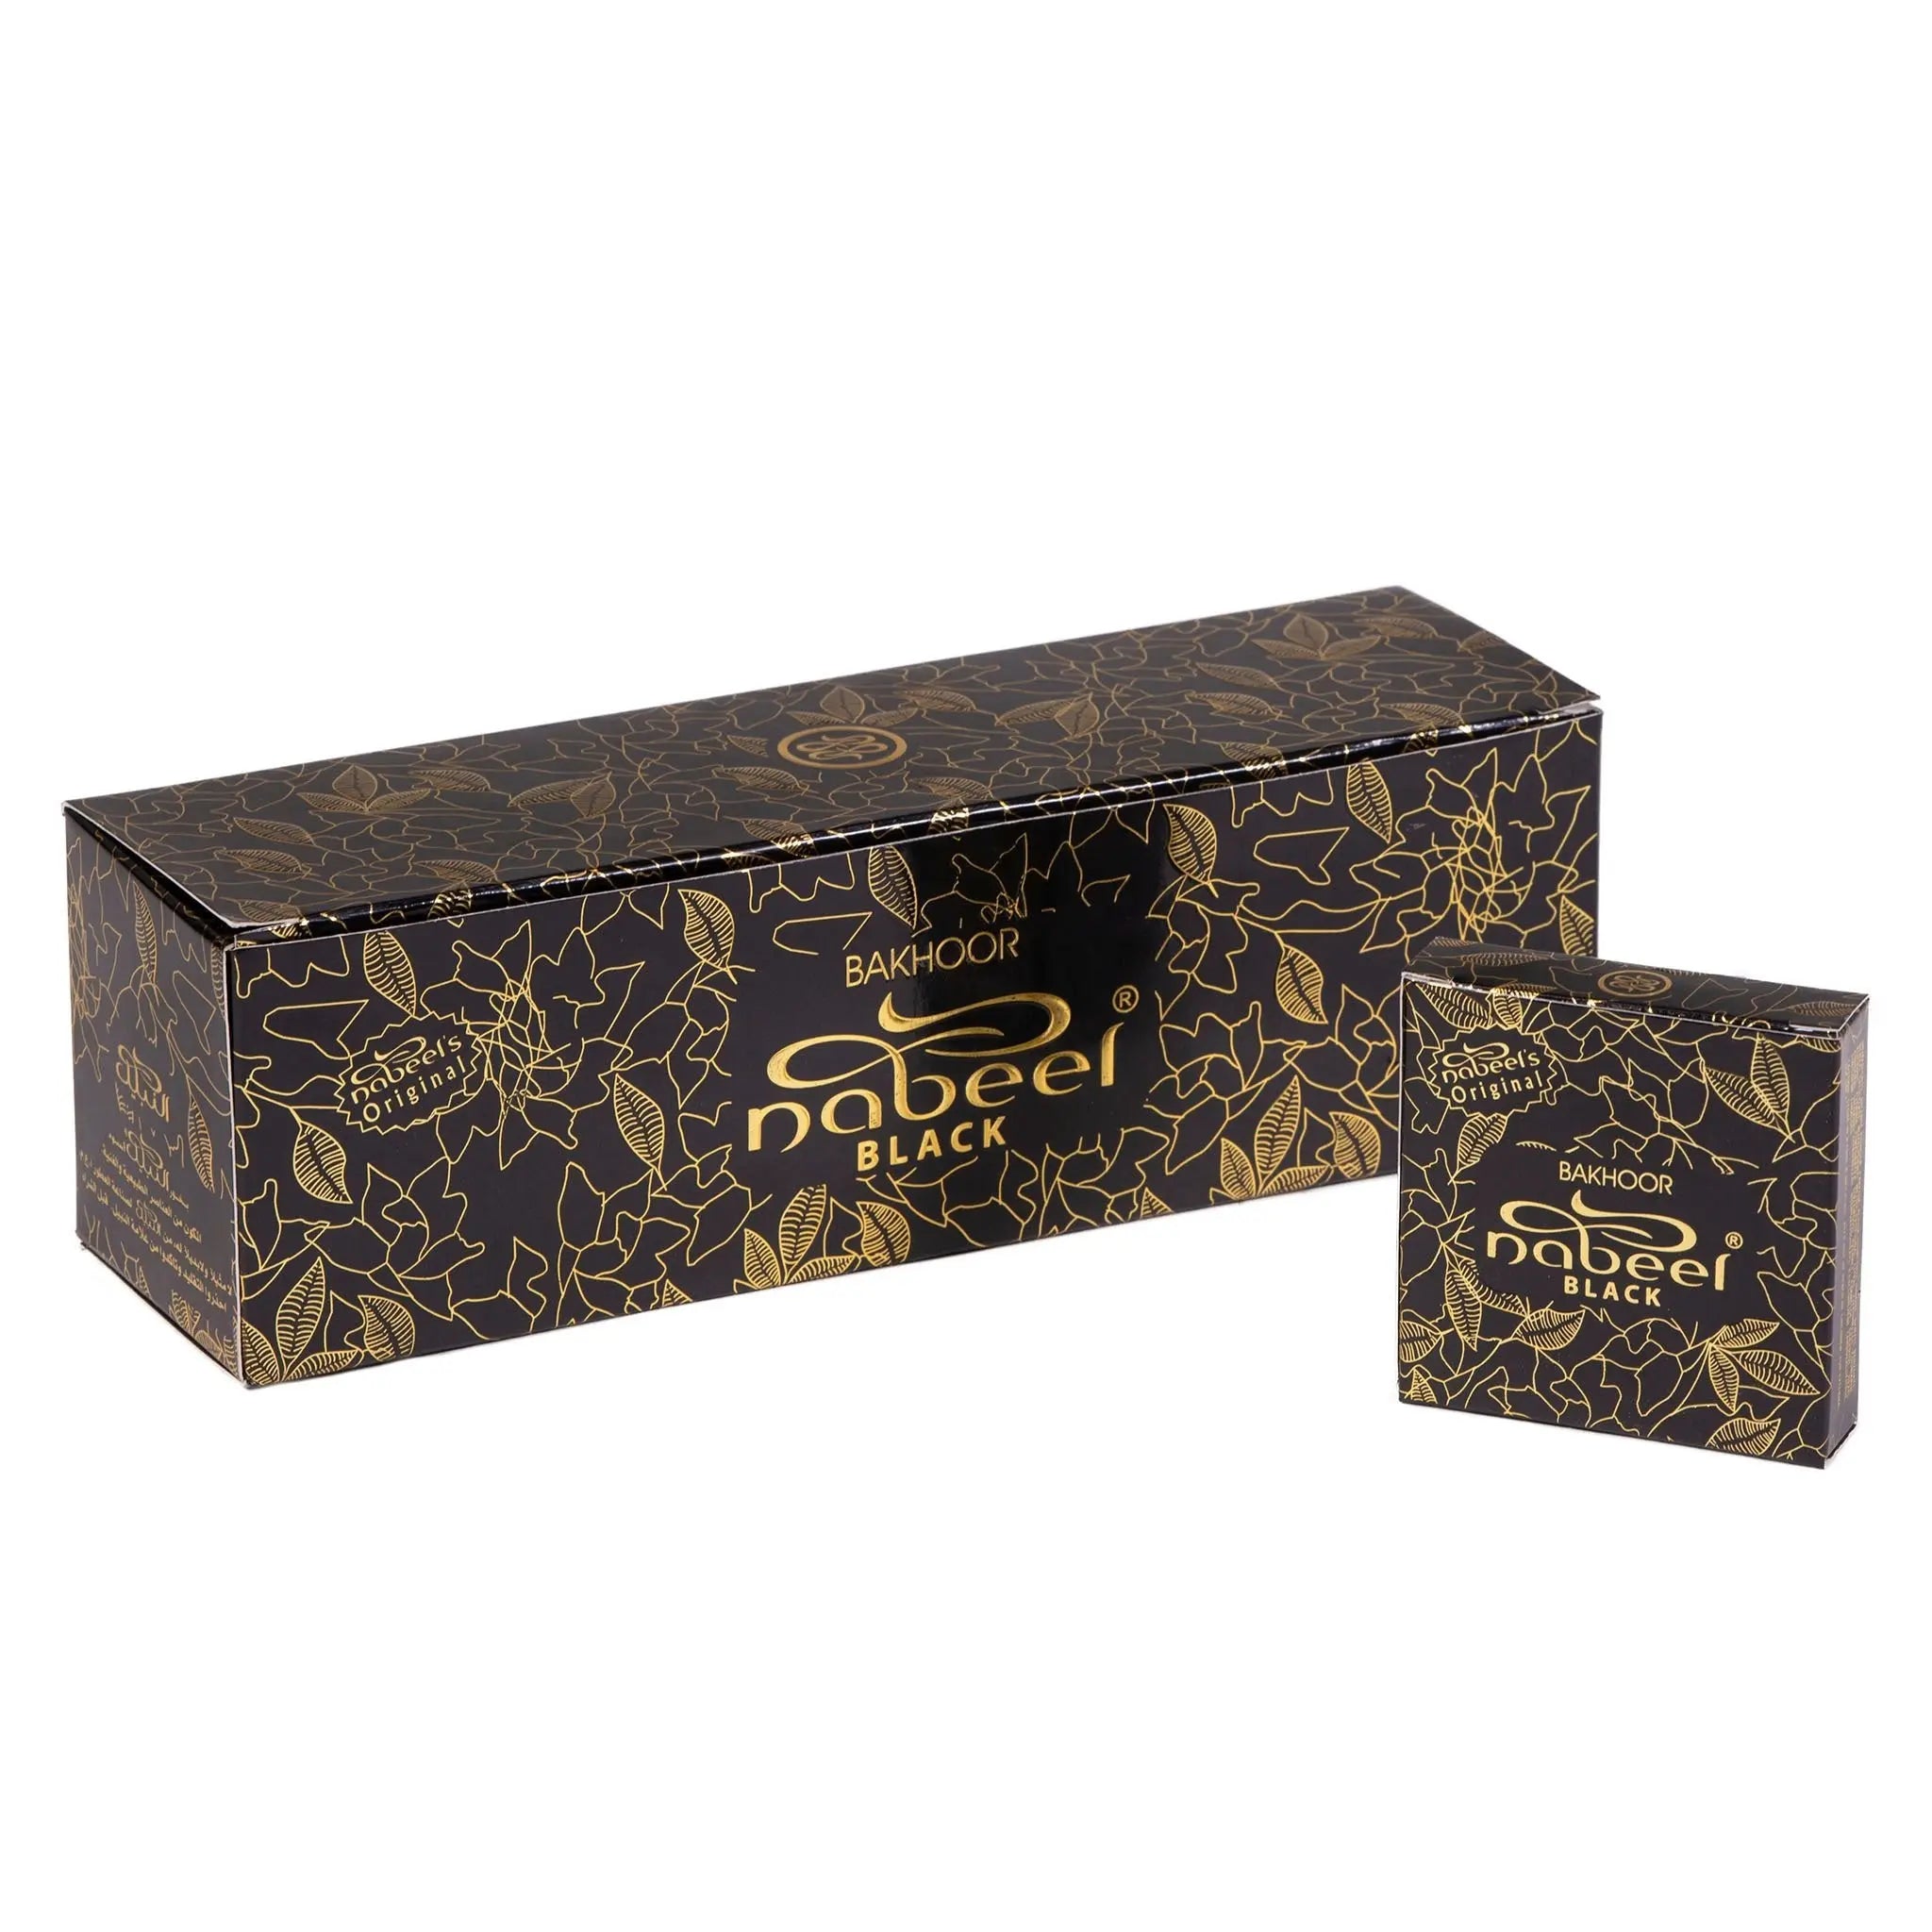 The image displays two boxes of 'Nabeel Bakhoor Black' incense products. The larger box is elongated, while the smaller one is a square shape, both featuring a black background with gold leaf patterns. The boxes have golden text that reads "Bakhoor Nabeel Black" with additional decorative elements around the text. The design conveys a sense of luxury and traditional fragrance aesthetics.